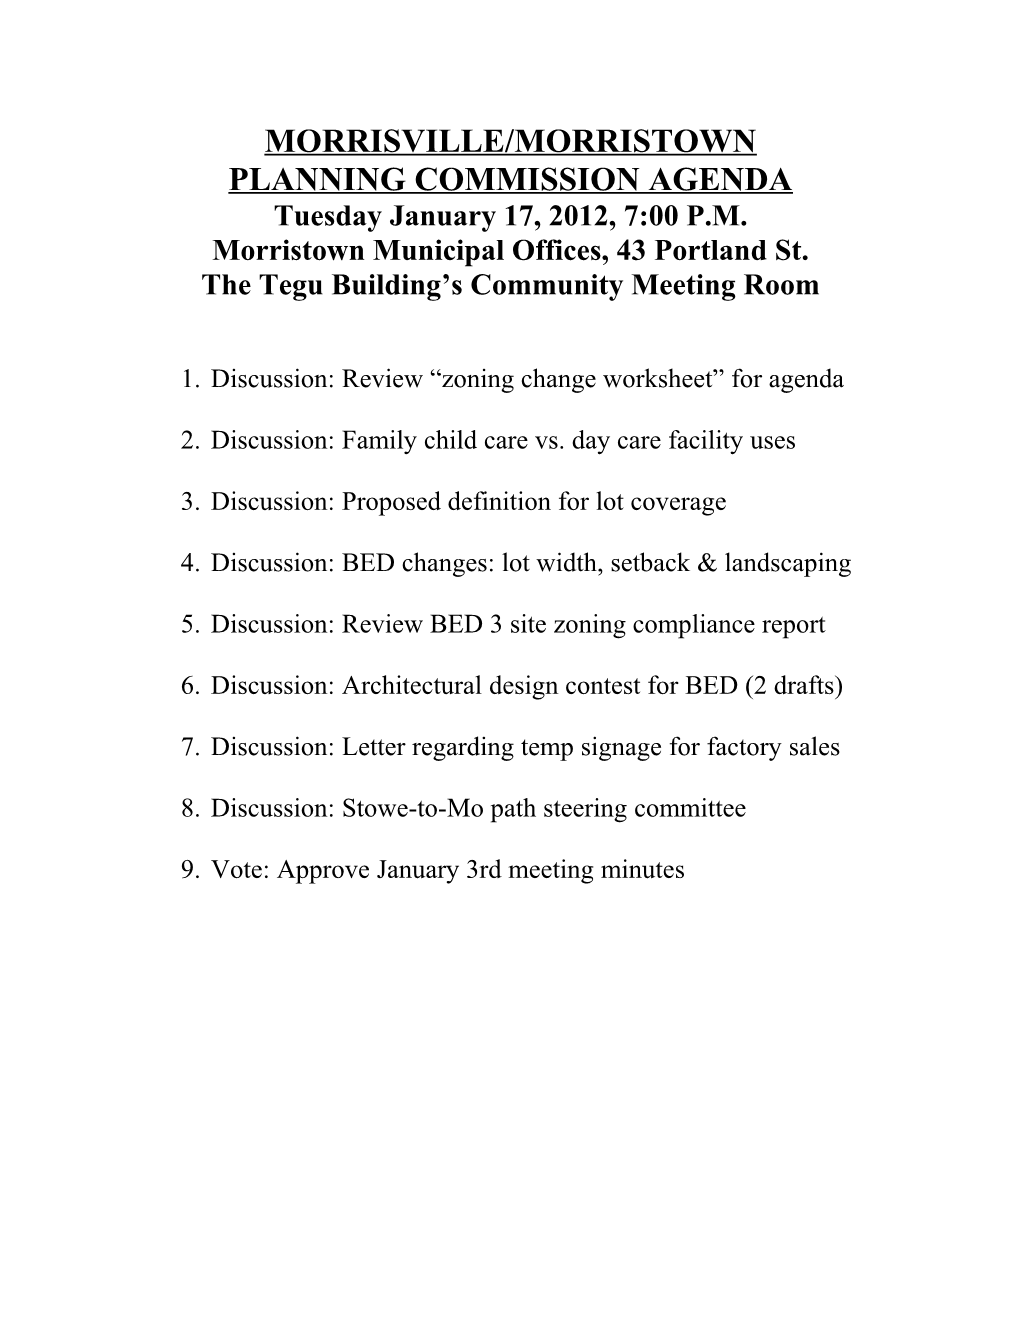 Morristown Planning Commission 9/4/07